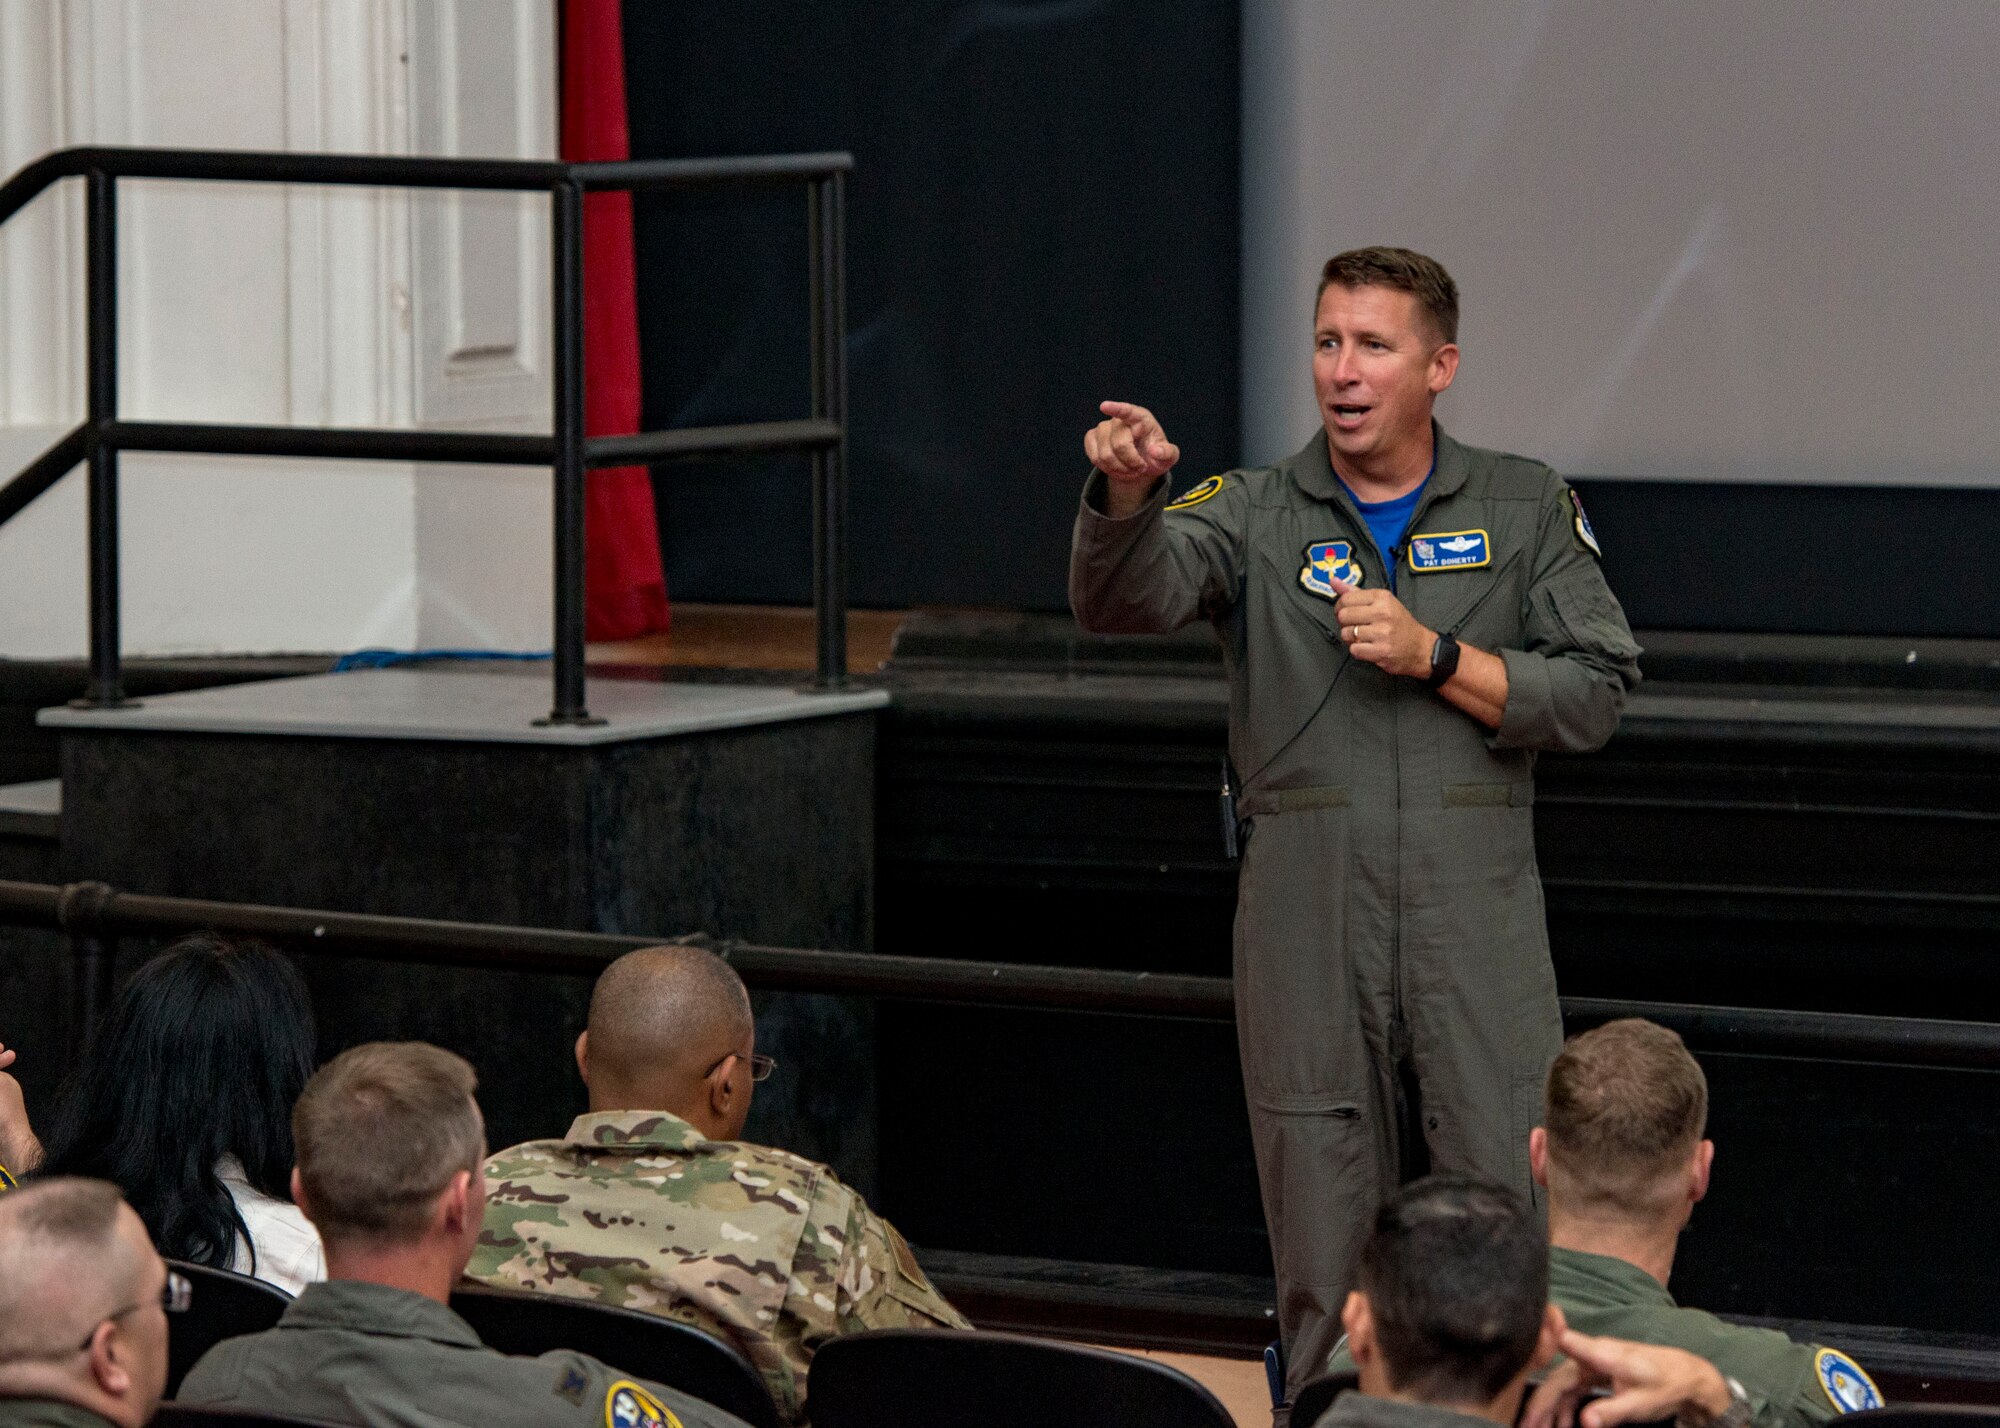 Maj. Gen. Patrick Doherty, 19th Air Force commander, speaks to Airmen attending the second annual Air Education and Training Command Flying Training Awards Ceremony Oct. 26, 2018, at Joint Base San Antonio-Randolph, Texas. The award ceremony recognizes individuals, squadrons, groups and wings whose efforts have led to the highest levels of student production.